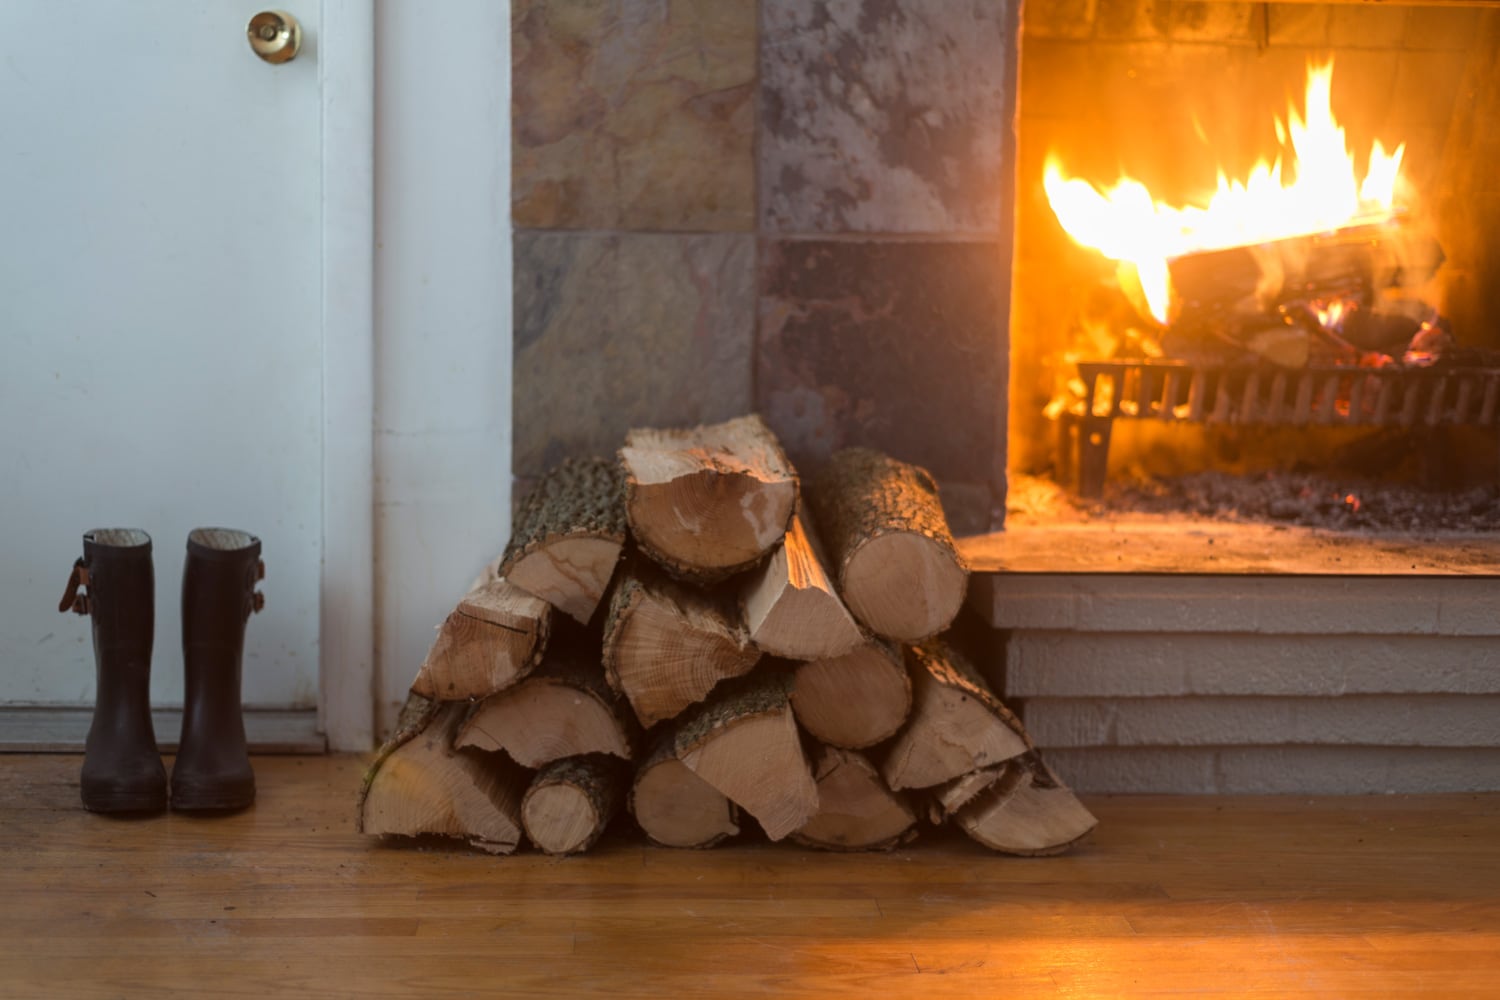 Slate titled fireplace with wood stack and boots by the door.